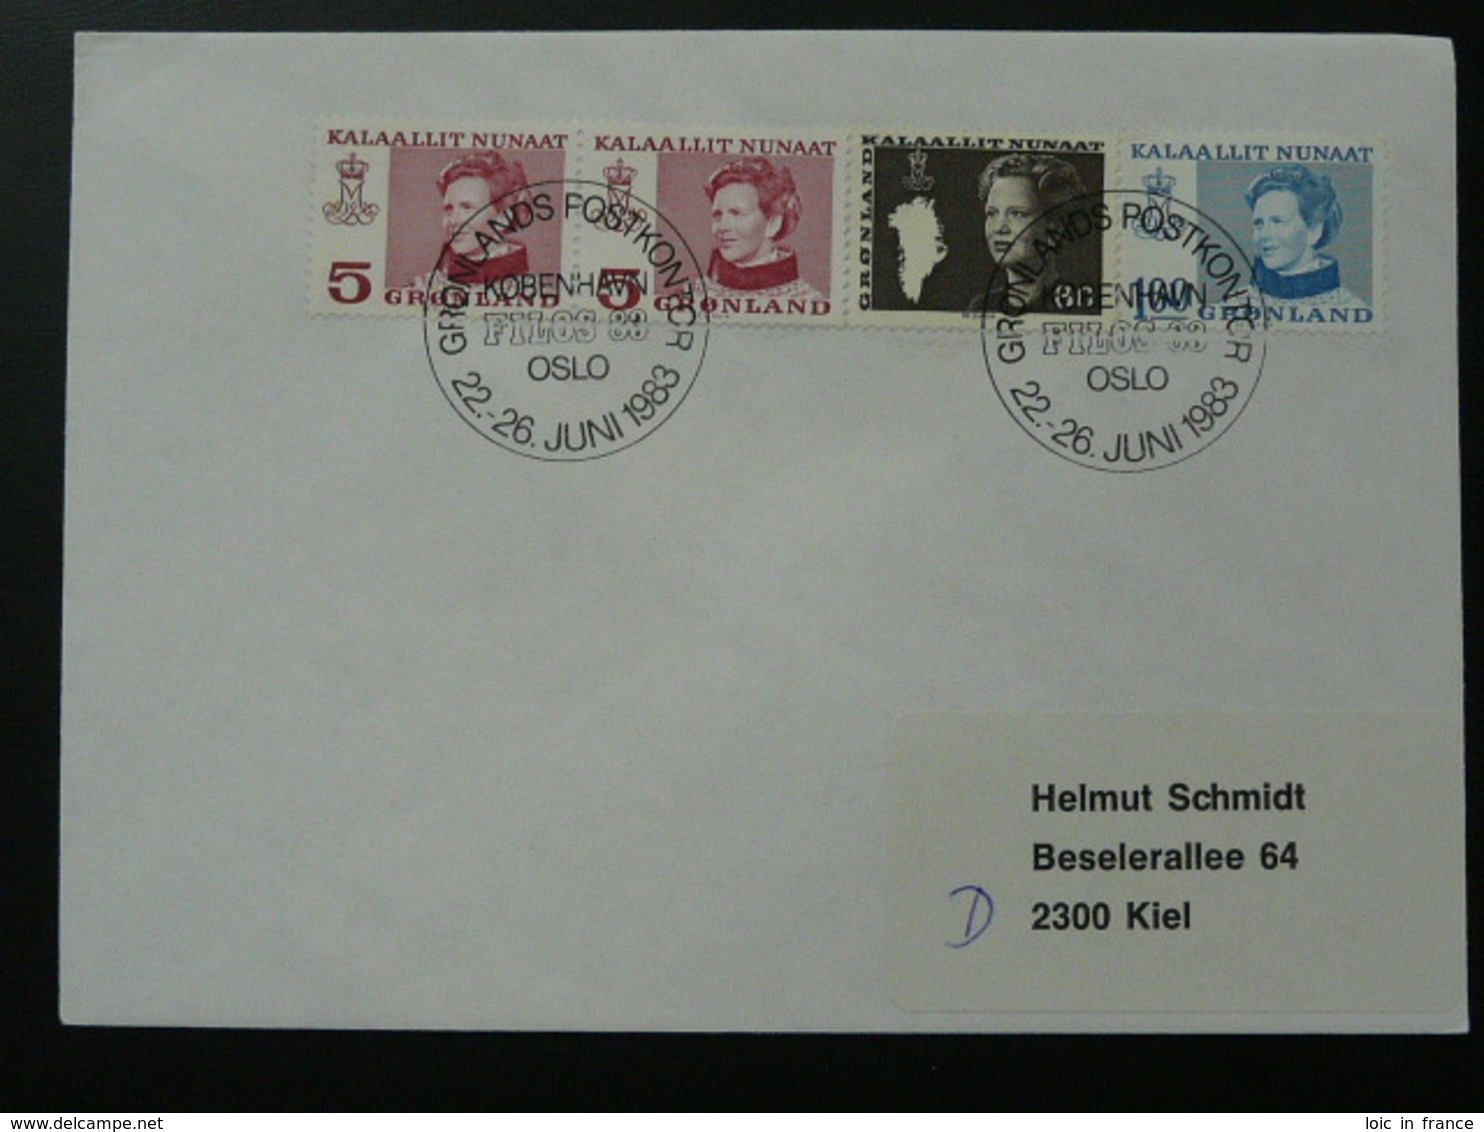 Slania Stamps Postmark On Cover Oslo Filos 1988 Greenland 69886 - Marcophilie